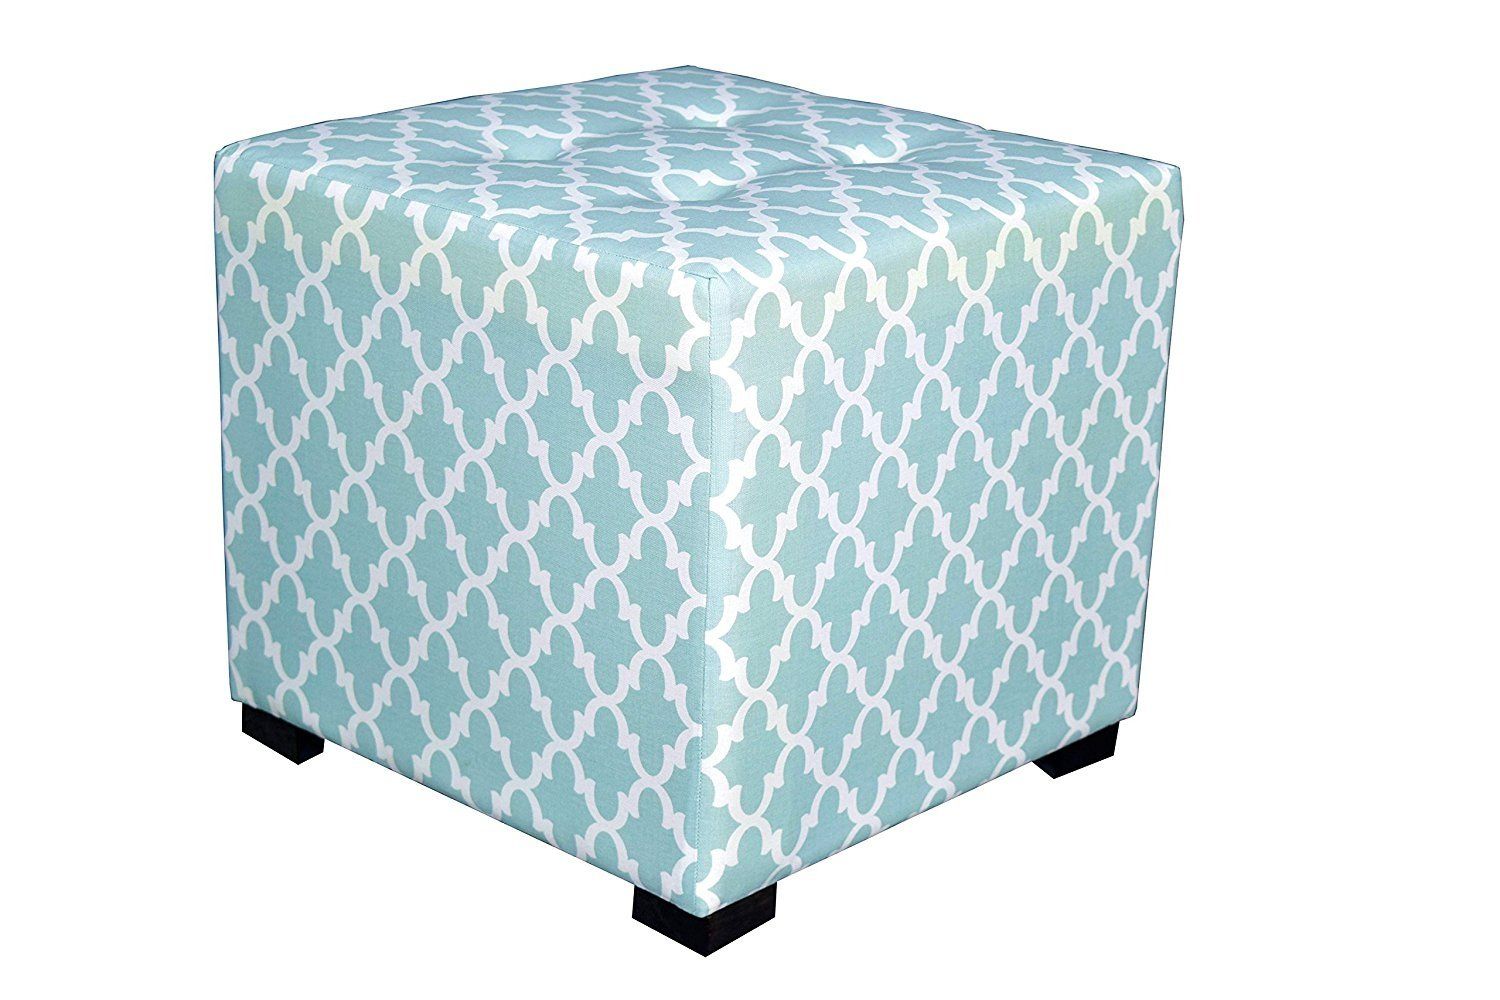 Mjl Furniture Designs Merton Collection, Fabric Upholstered Modern Cube Intended For Orange Fabric Modern Cube Ottomans (View 8 of 20)